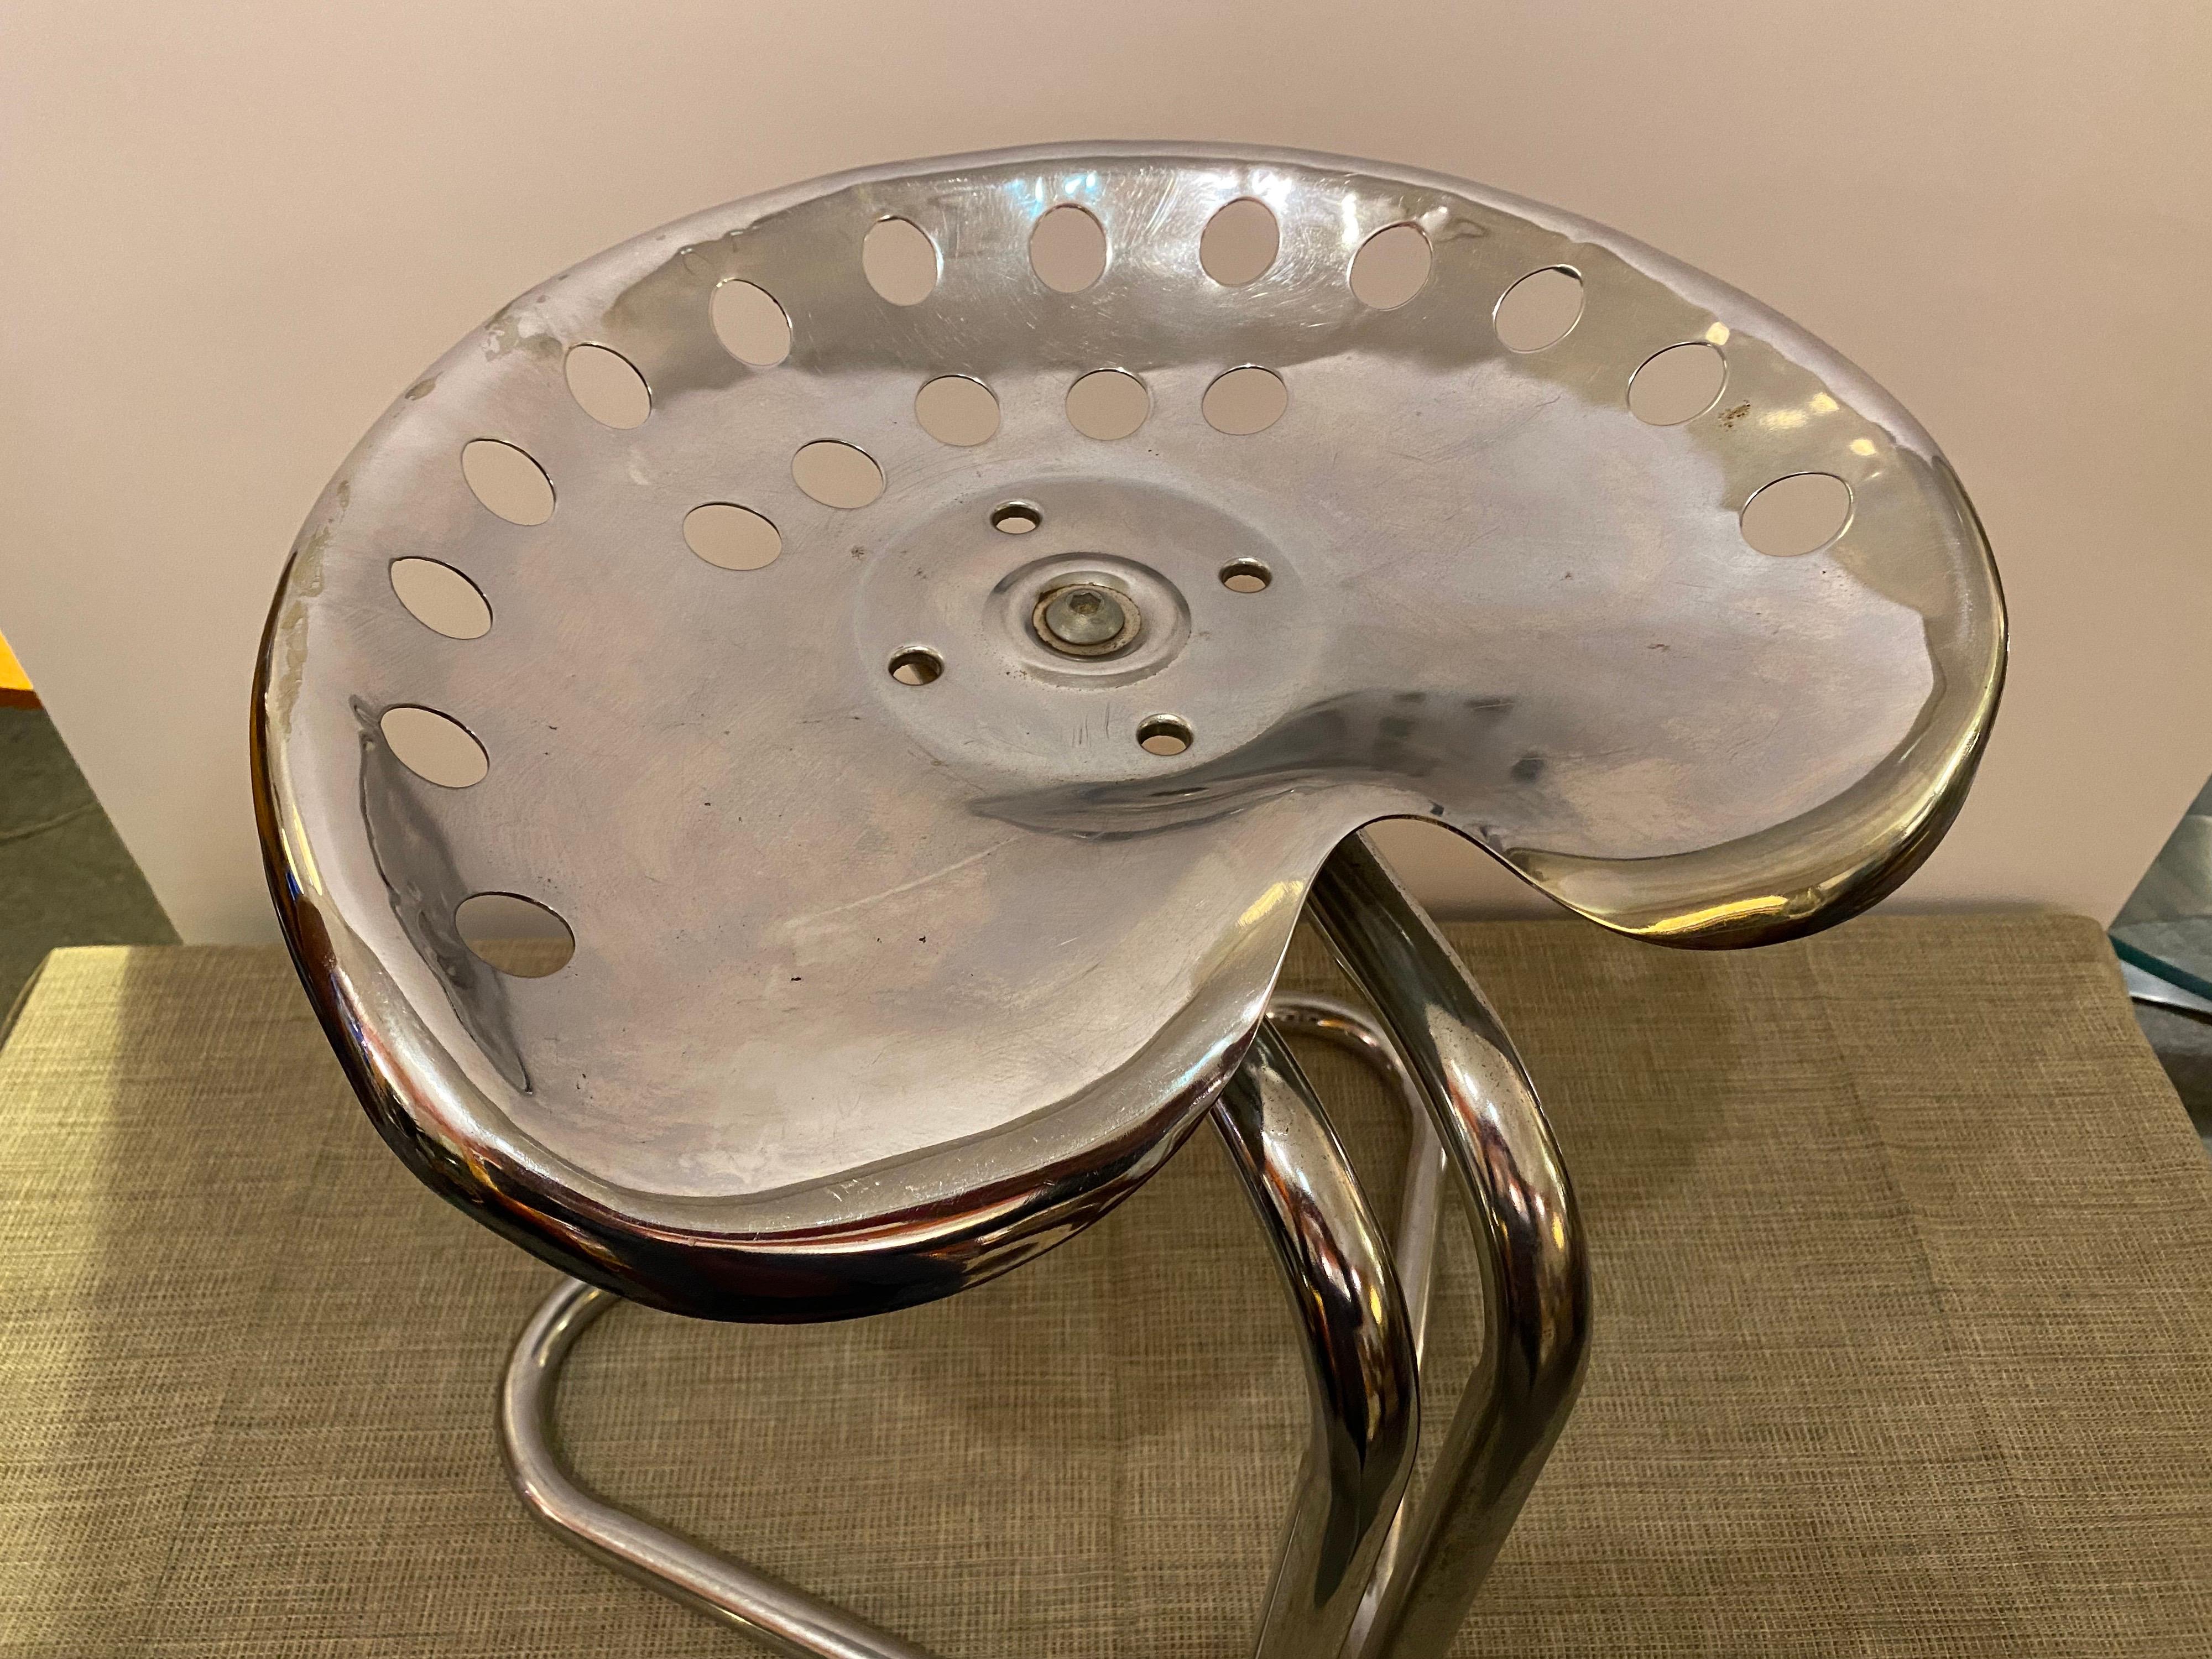 Chrome tractor stool in the style of Achille and Pier Giacomo Castiglioni. Stool dates the 1970's. Shows signs of use and wear, overall Chrome presents pretty well. Nice design, fits easily into many spaces and uses.